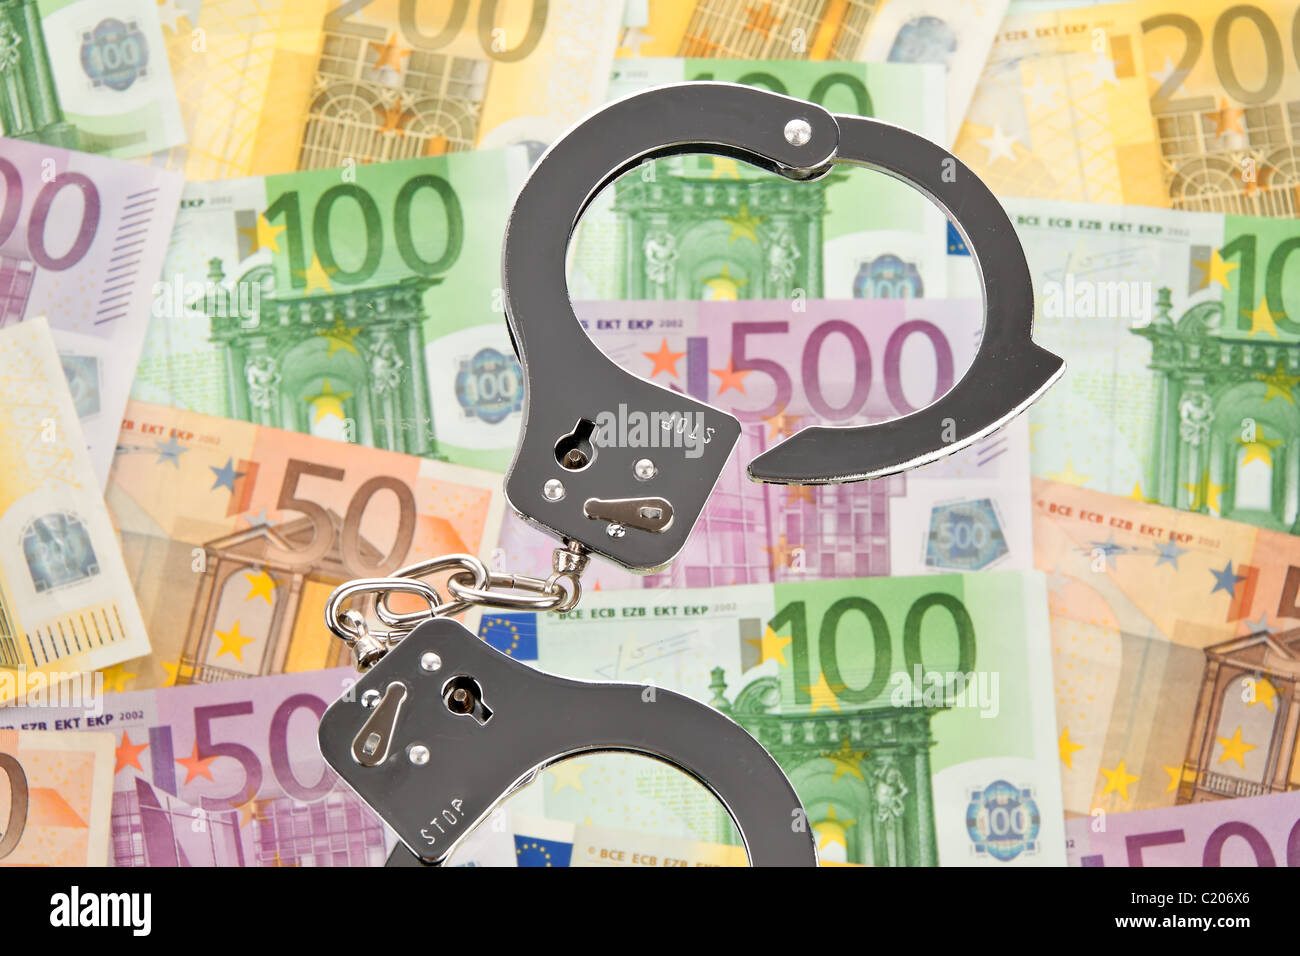 Euro bank notes with handcuffs Stock Photo